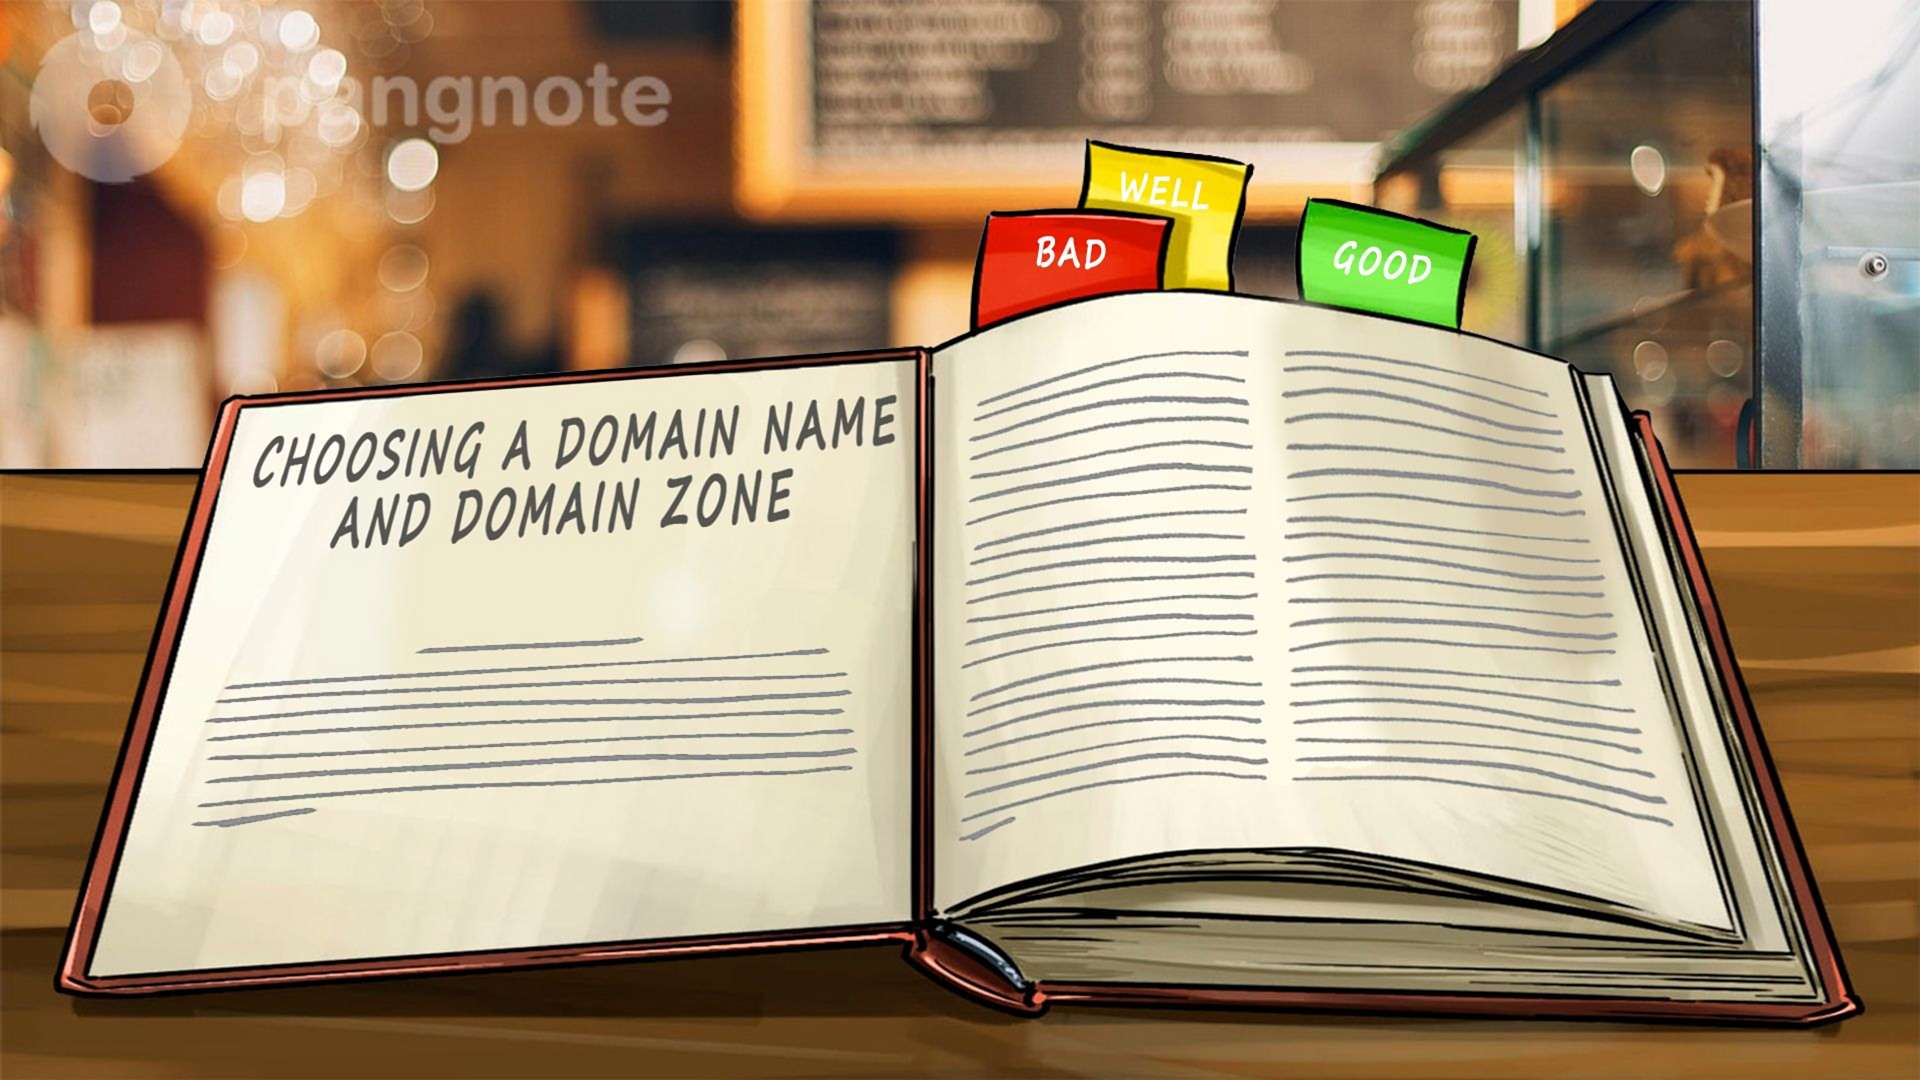 Recommendations for choosing a domain name and domain zone